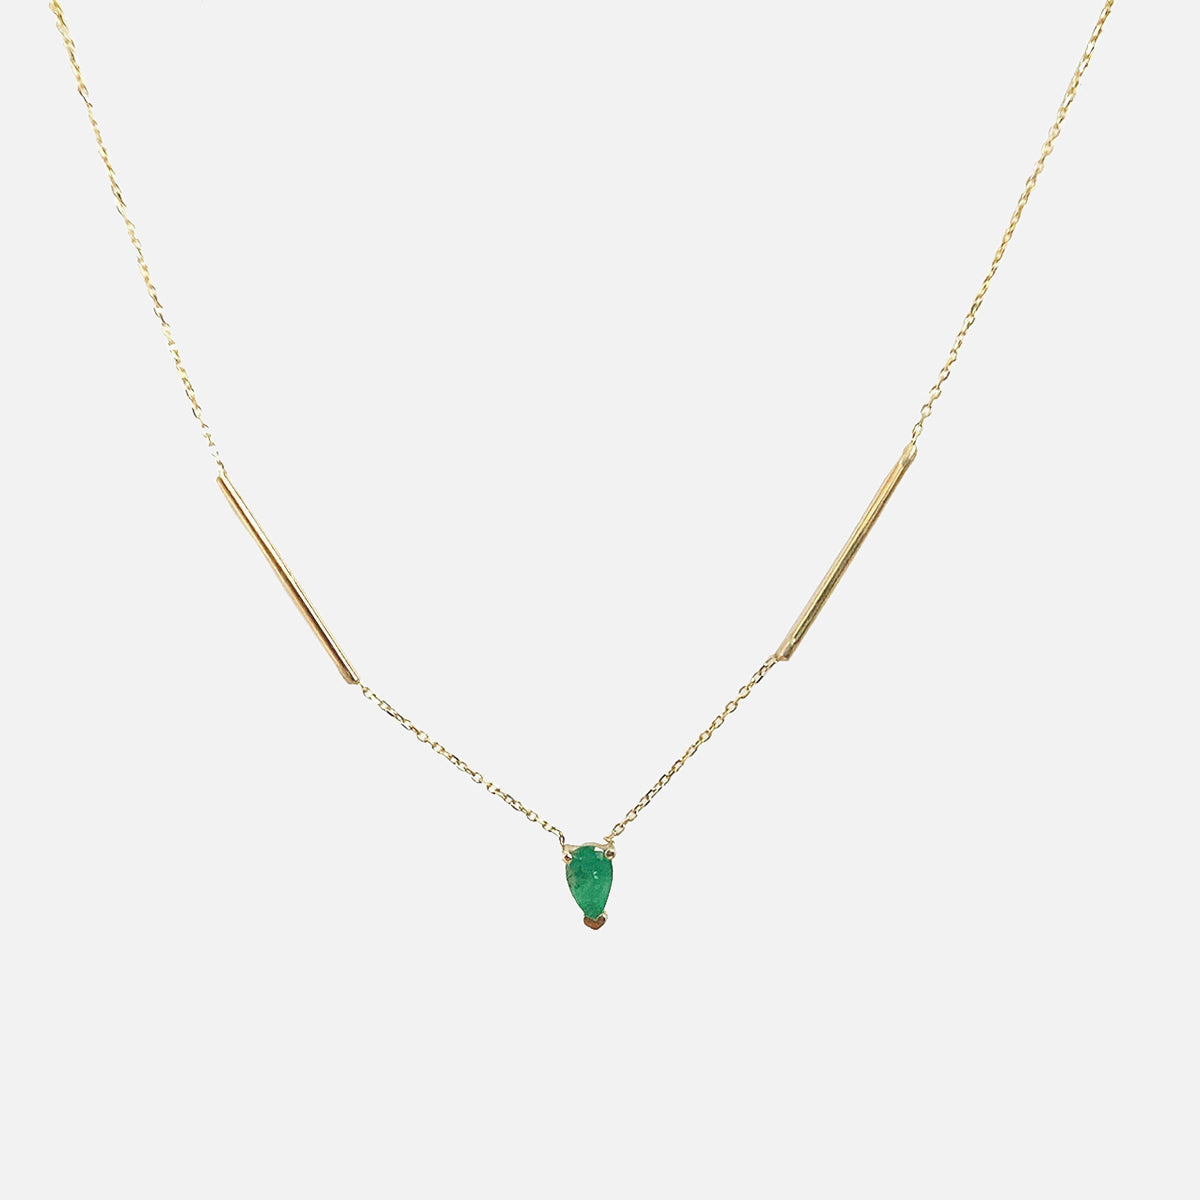 Deconstructed Bar Gold Necklace